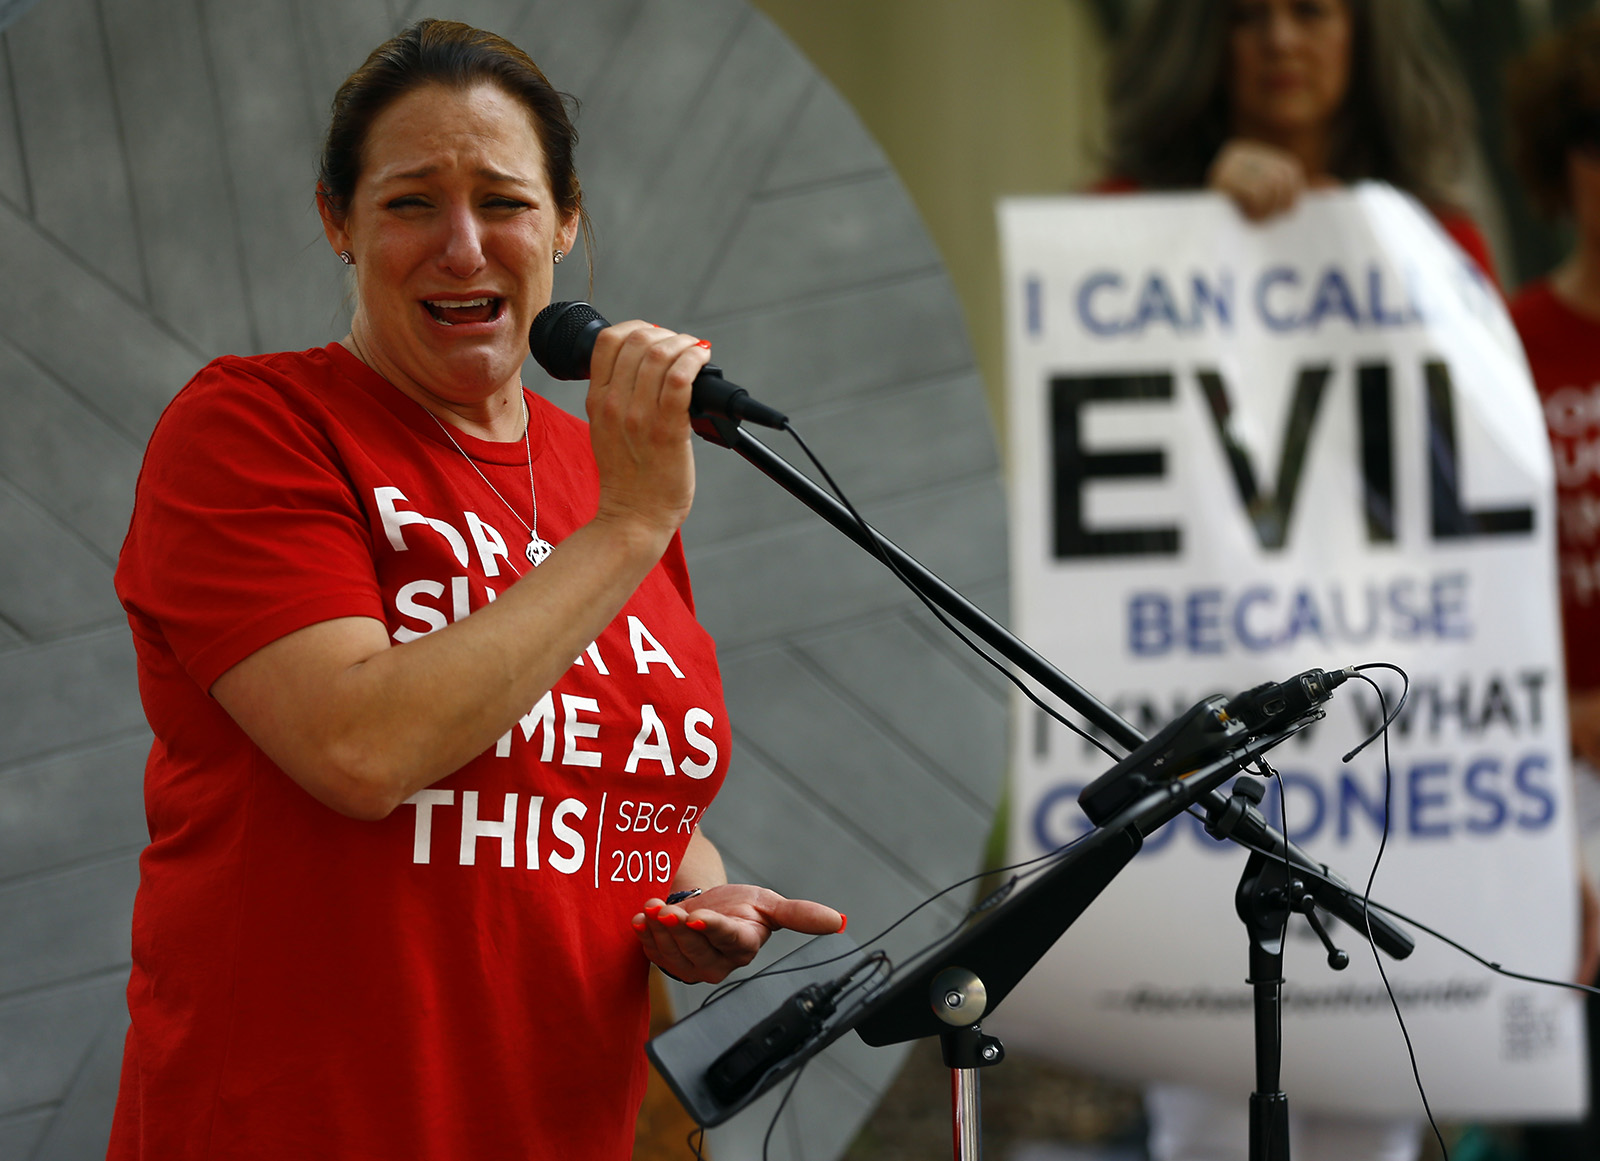 Jules Woodson of Colorado Springs becomes emotional as she talks about her abuse survival during a rally outside the annual meeting of the Southern Baptist Convention at the BJCC, June 11, 2019 in Birmingham, Ala. RNS photo by Butch Dill.